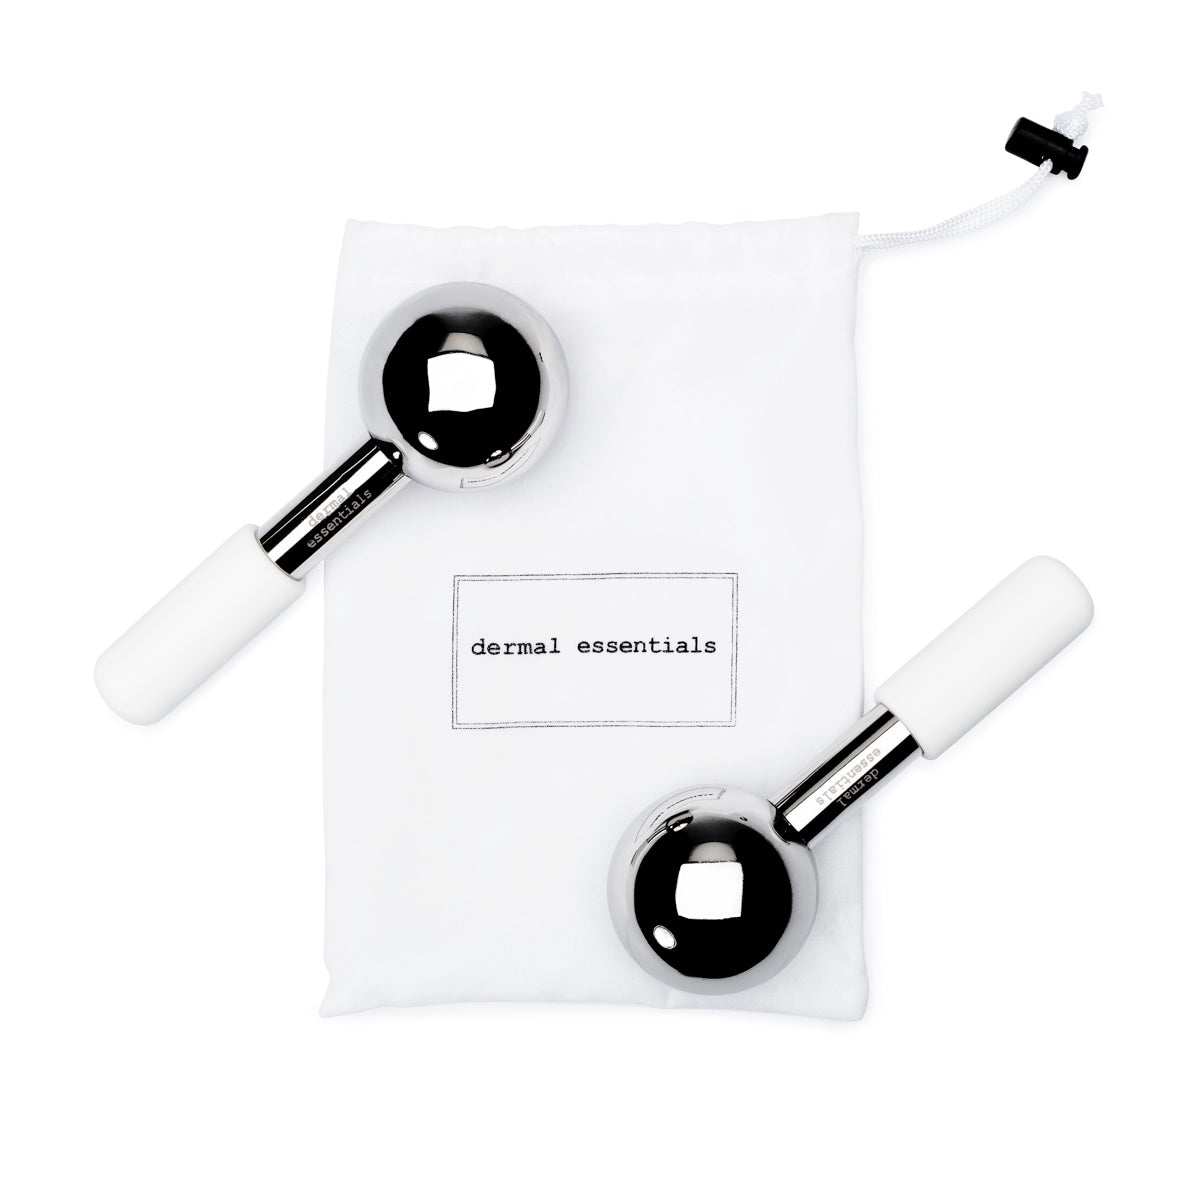 Two stainless steel ice beauty globes white foam handles white cloth draw string bag with black letters Dermal Essentials Medical Grade Skincare